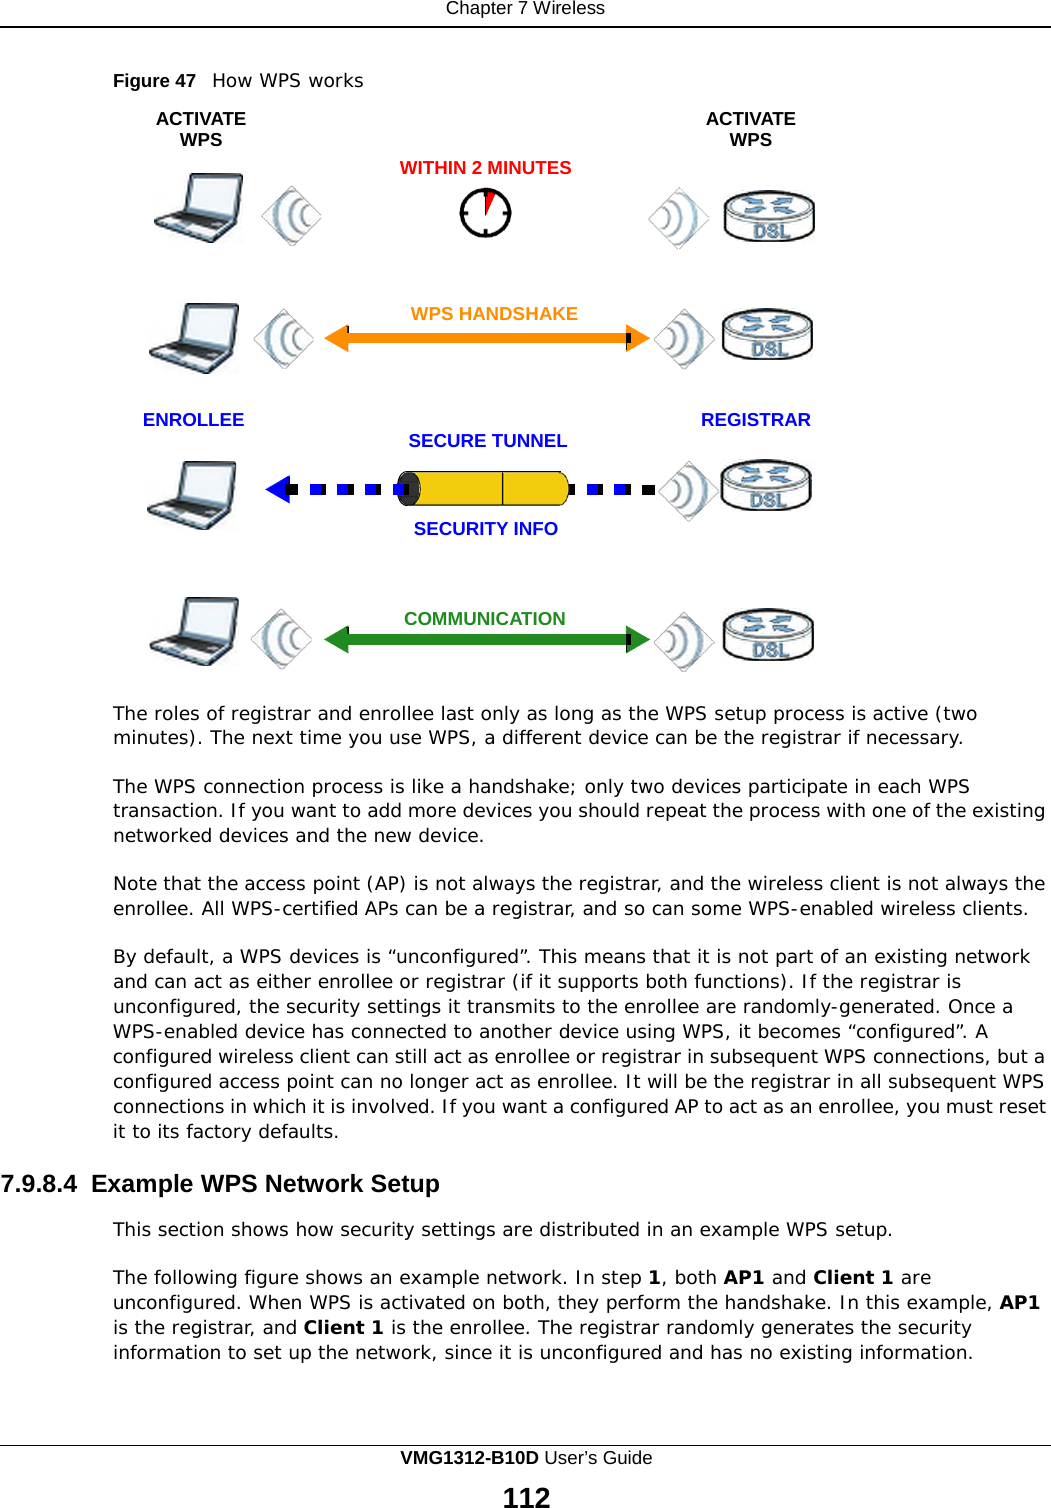 Chapter 7 Wireless                                Figure 47   How WPS works  ACTIVATE WPS         ENROLLEE     WITHIN 2 MINUTES       WPS HANDSHAKE      SECURE TUNNEL    SECURITY INFO   ACTIVATE WPS            REGISTRAR    COMMUNICATION    The roles of registrar and enrollee last only as long as the WPS setup process is active (two minutes). The next time you use WPS, a different device can be the registrar if necessary.  The WPS connection process is like a handshake; only two devices participate in each WPS transaction. If you want to add more devices you should repeat the process with one of the existing networked devices and the new device.  Note that the access point (AP) is not always the registrar, and the wireless client is not always the enrollee. All WPS-certified APs can be a registrar, and so can some WPS-enabled wireless clients.  By default, a WPS devices is “unconfigured”. This means that it is not part of an existing network and can act as either enrollee or registrar (if it supports both functions). If the registrar is unconfigured, the security settings it transmits to the enrollee are randomly-generated. Once a WPS-enabled device has connected to another device using WPS, it becomes “configured”. A configured wireless client can still act as enrollee or registrar in subsequent WPS connections, but a configured access point can no longer act as enrollee. It will be the registrar in all subsequent WPS connections in which it is involved. If you want a configured AP to act as an enrollee, you must reset it to its factory defaults.  7.9.8.4 Example WPS Network Setup  This section shows how security settings are distributed in an example WPS setup.  The following figure shows an example network. In step 1, both AP1 and Client 1 are unconfigured. When WPS is activated on both, they perform the handshake. In this example, AP1 is the registrar, and Client 1 is the enrollee. The registrar randomly generates the security information to set up the network, since it is unconfigured and has no existing information. VMG1312-B10D User’s Guide  112  